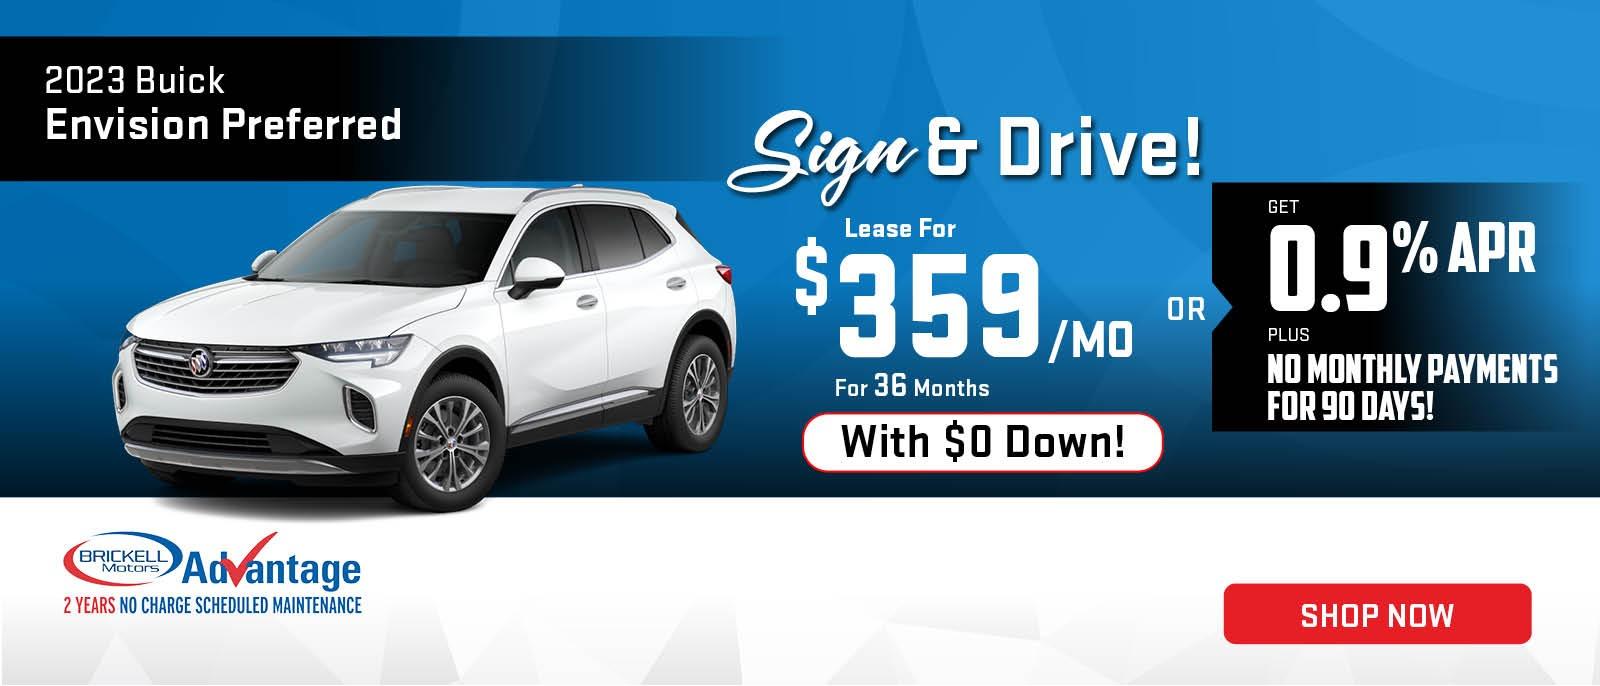 Sign & Drive
Lease for $359 per month for 36 months with $0 down
Or Get 0.9% APR Plus No Monthly Payments for 90 Days!